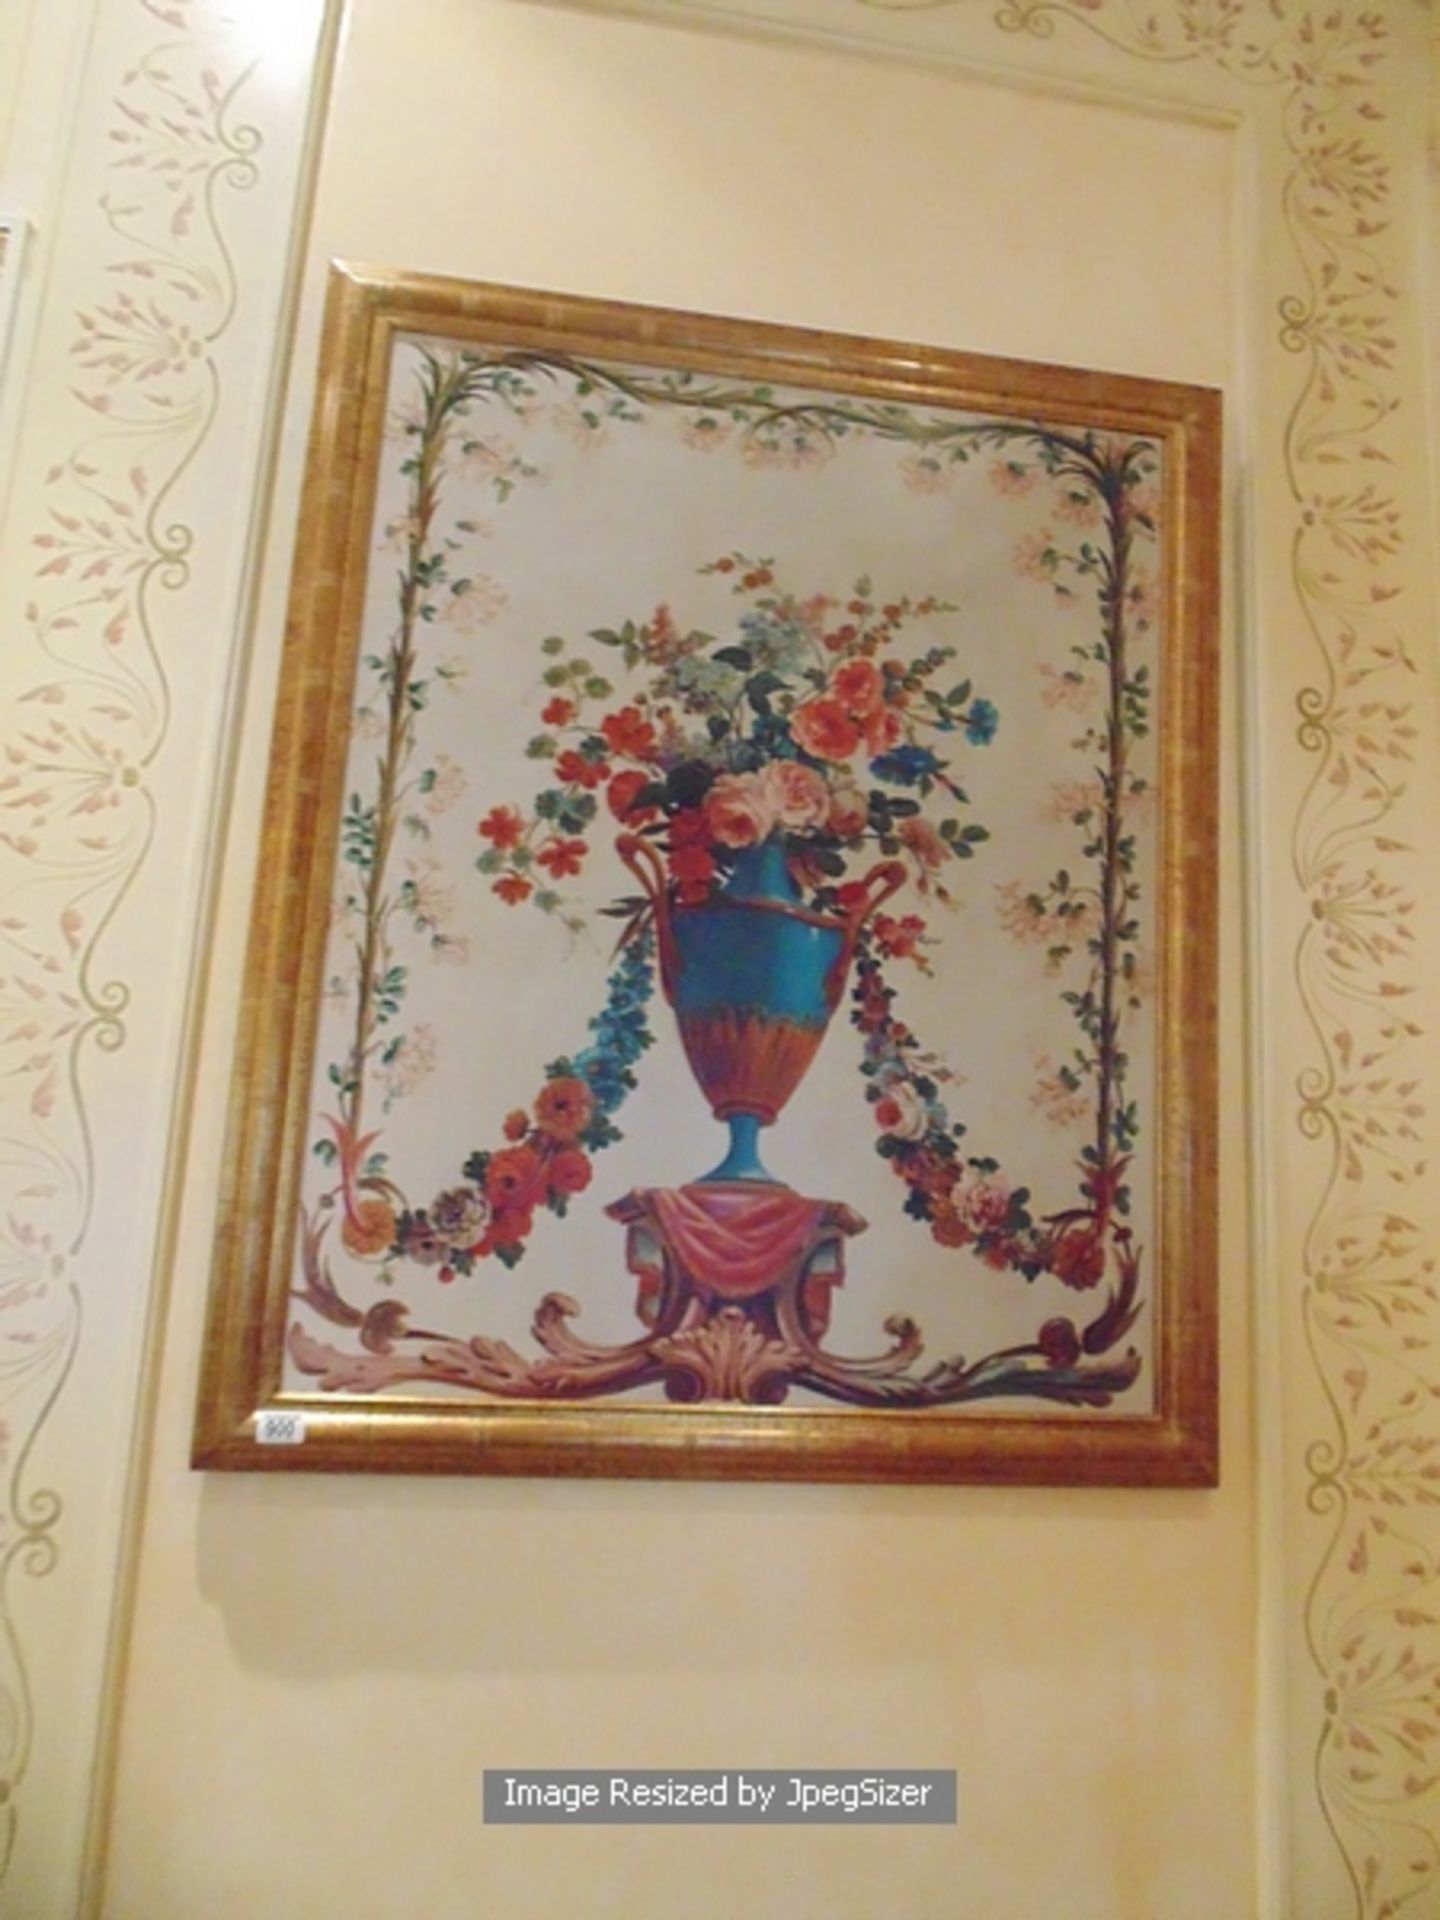 An Italianate still life floral painting on canvas in gilt frame 920mm x 1110mm